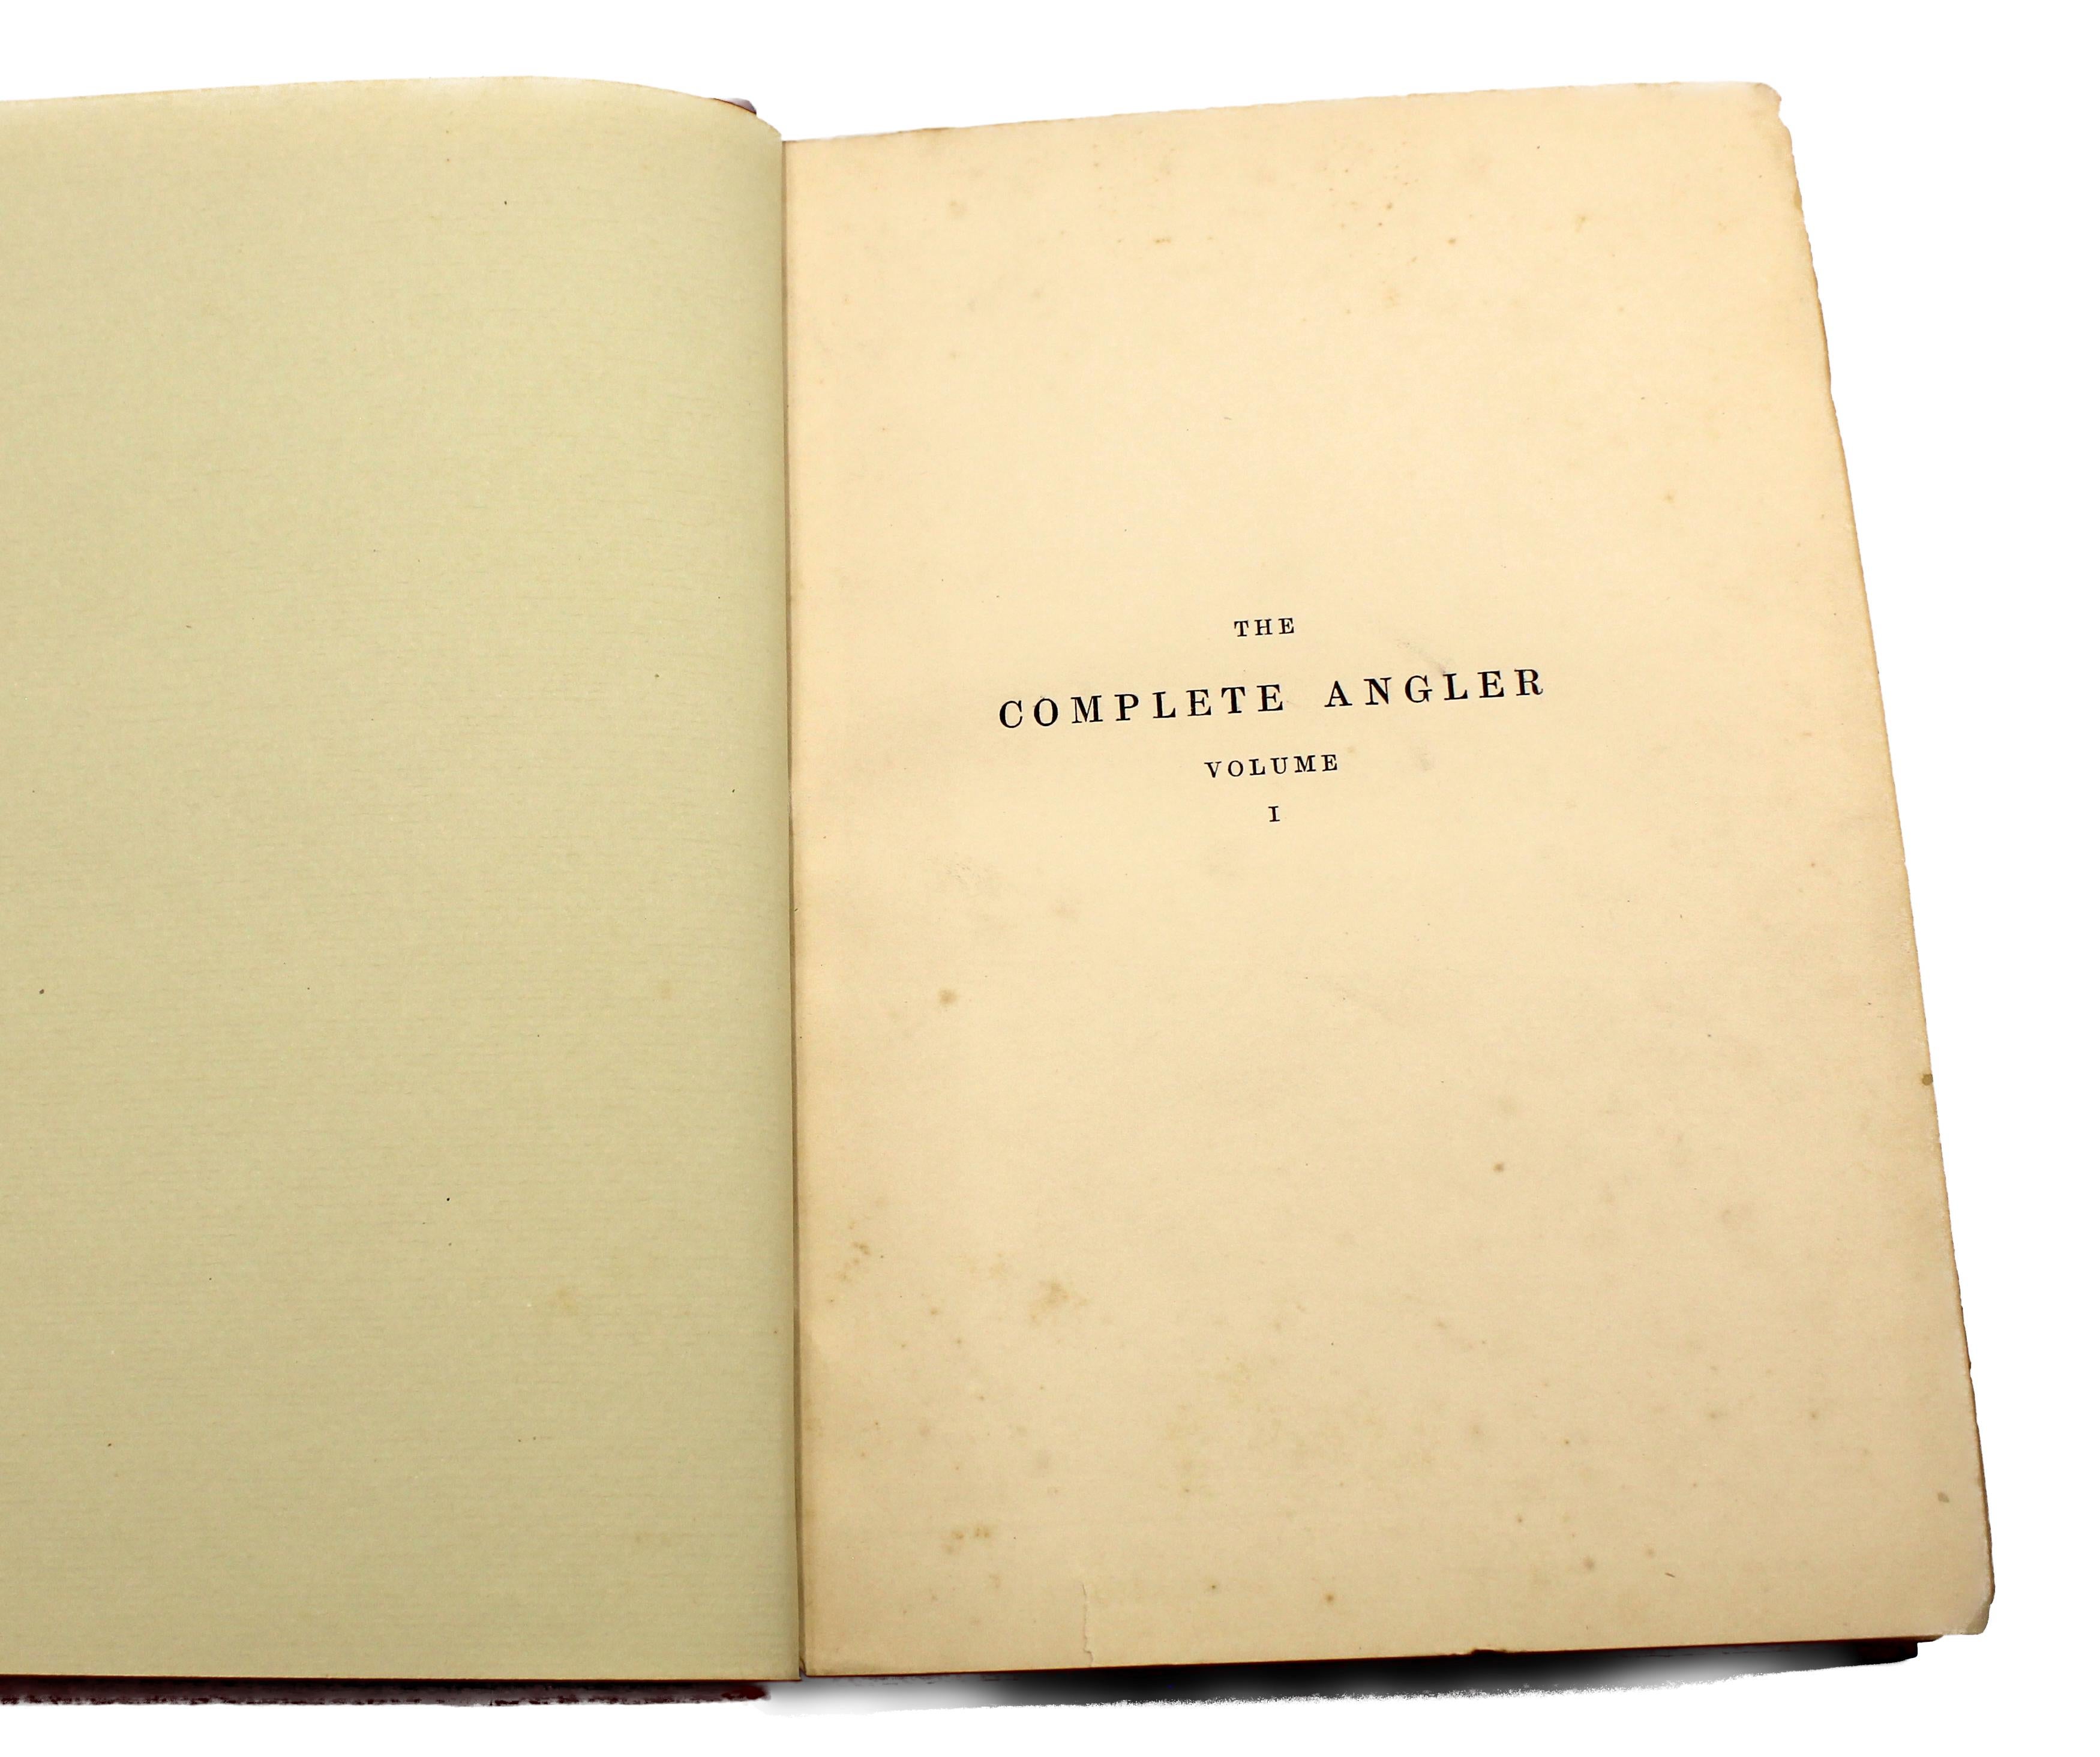 Gilt The Complete Angler by Izaak Walton and Charles Cotton, Edited by Harris Nicolas For Sale